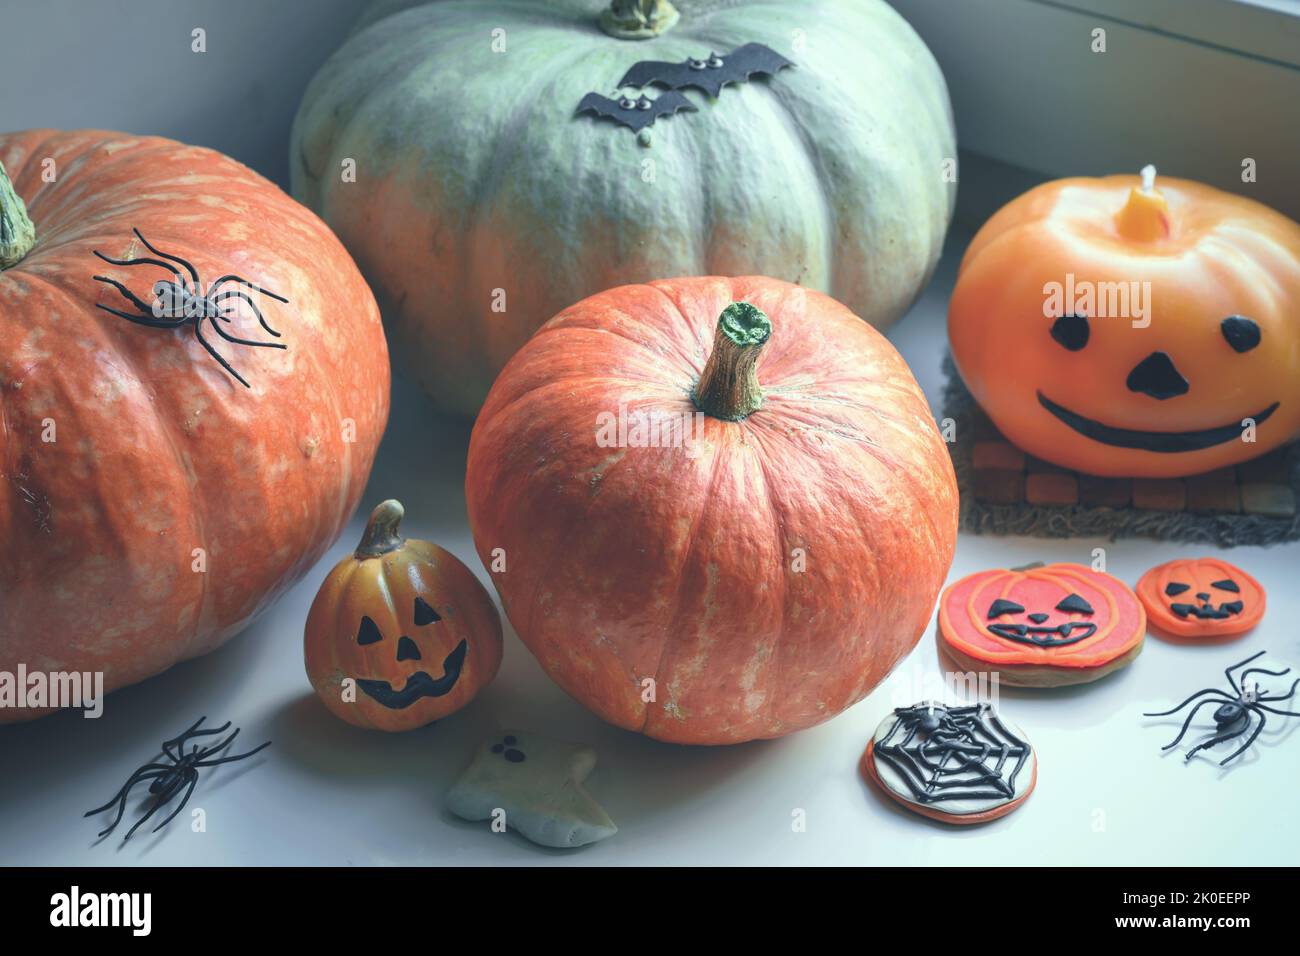 Halloween pumpkins and decorations at home. Vintage style photo of vegetables and sweets by window on hallowen. Concept of season, food, still life, a Stock Photo